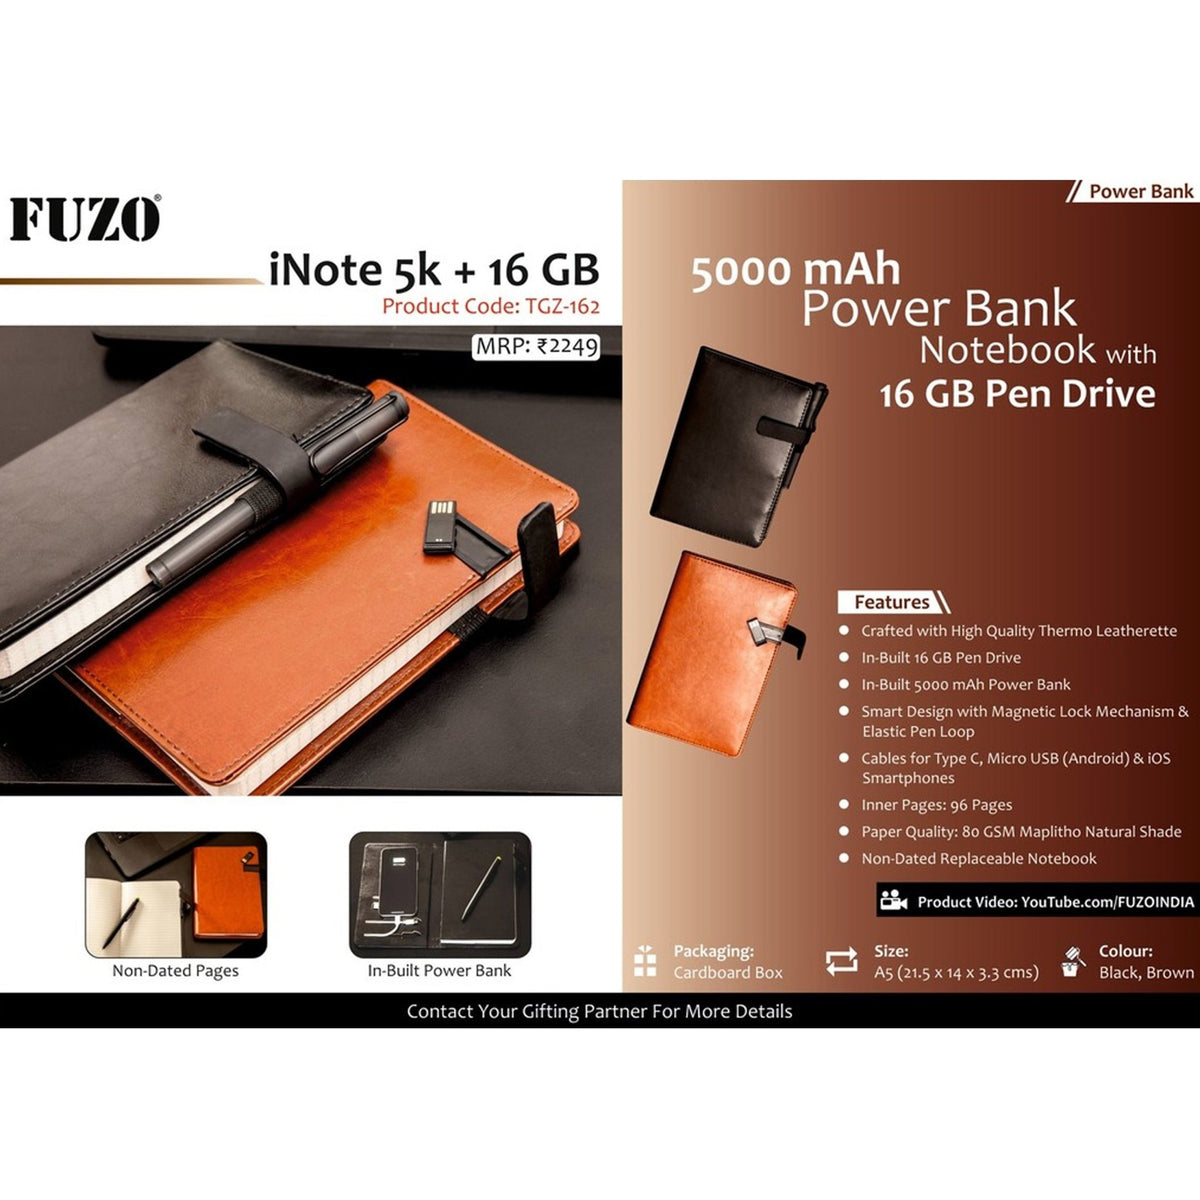 iNote 5000 mAh Power Bank Notebook with 16 GB Pen Drive - TGZ-162